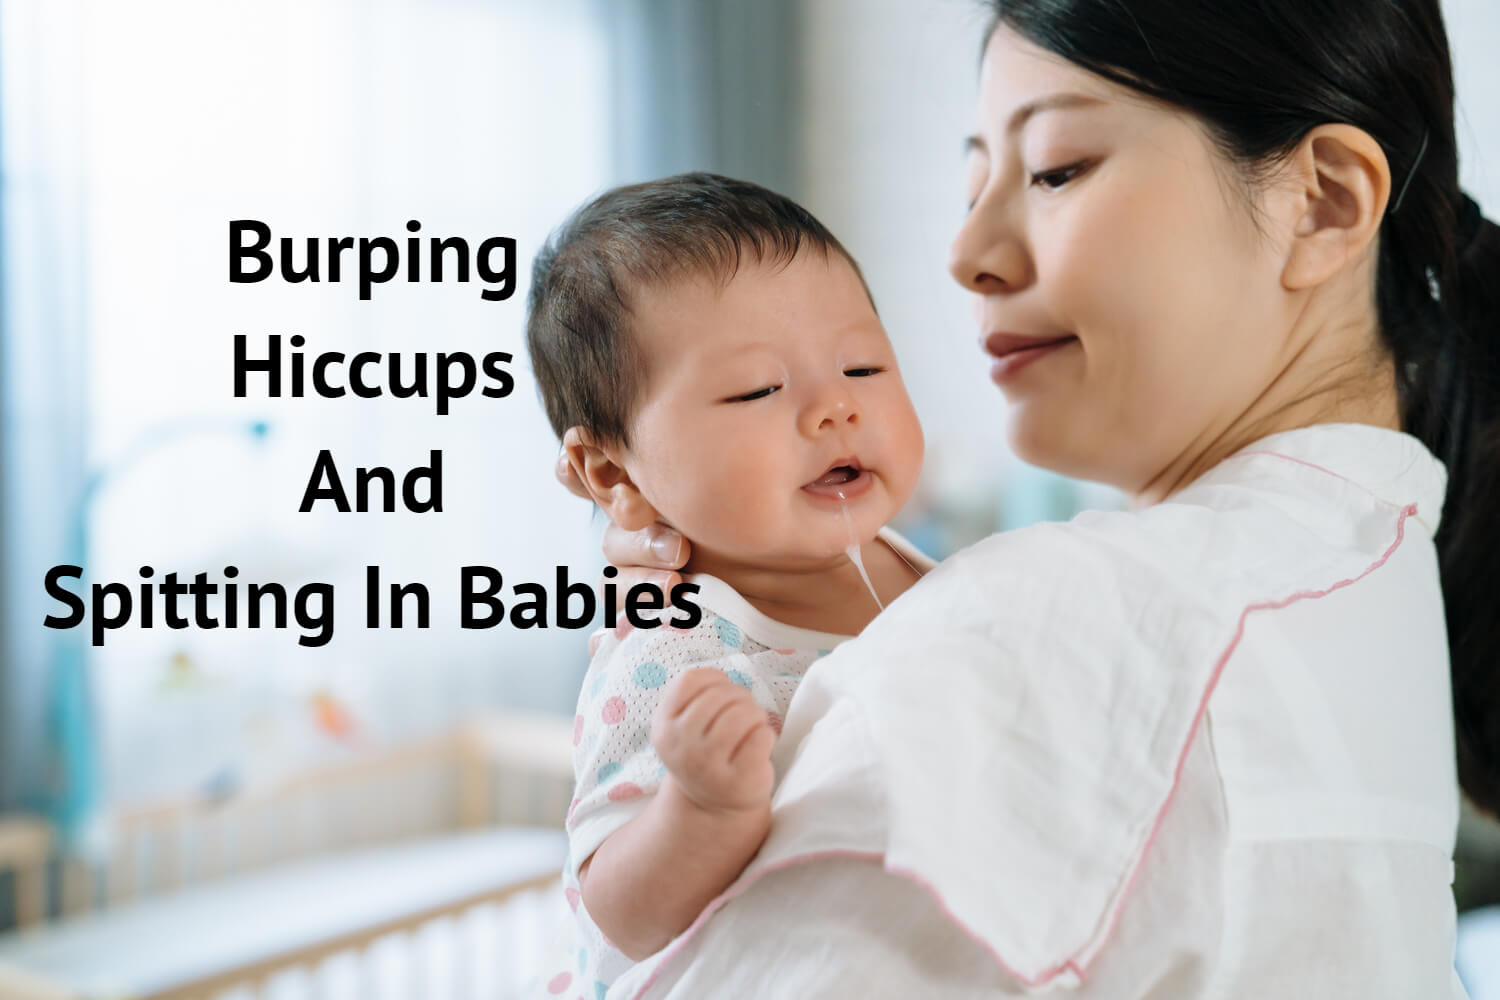 Burping, Hiccups, And Spitting in Babies